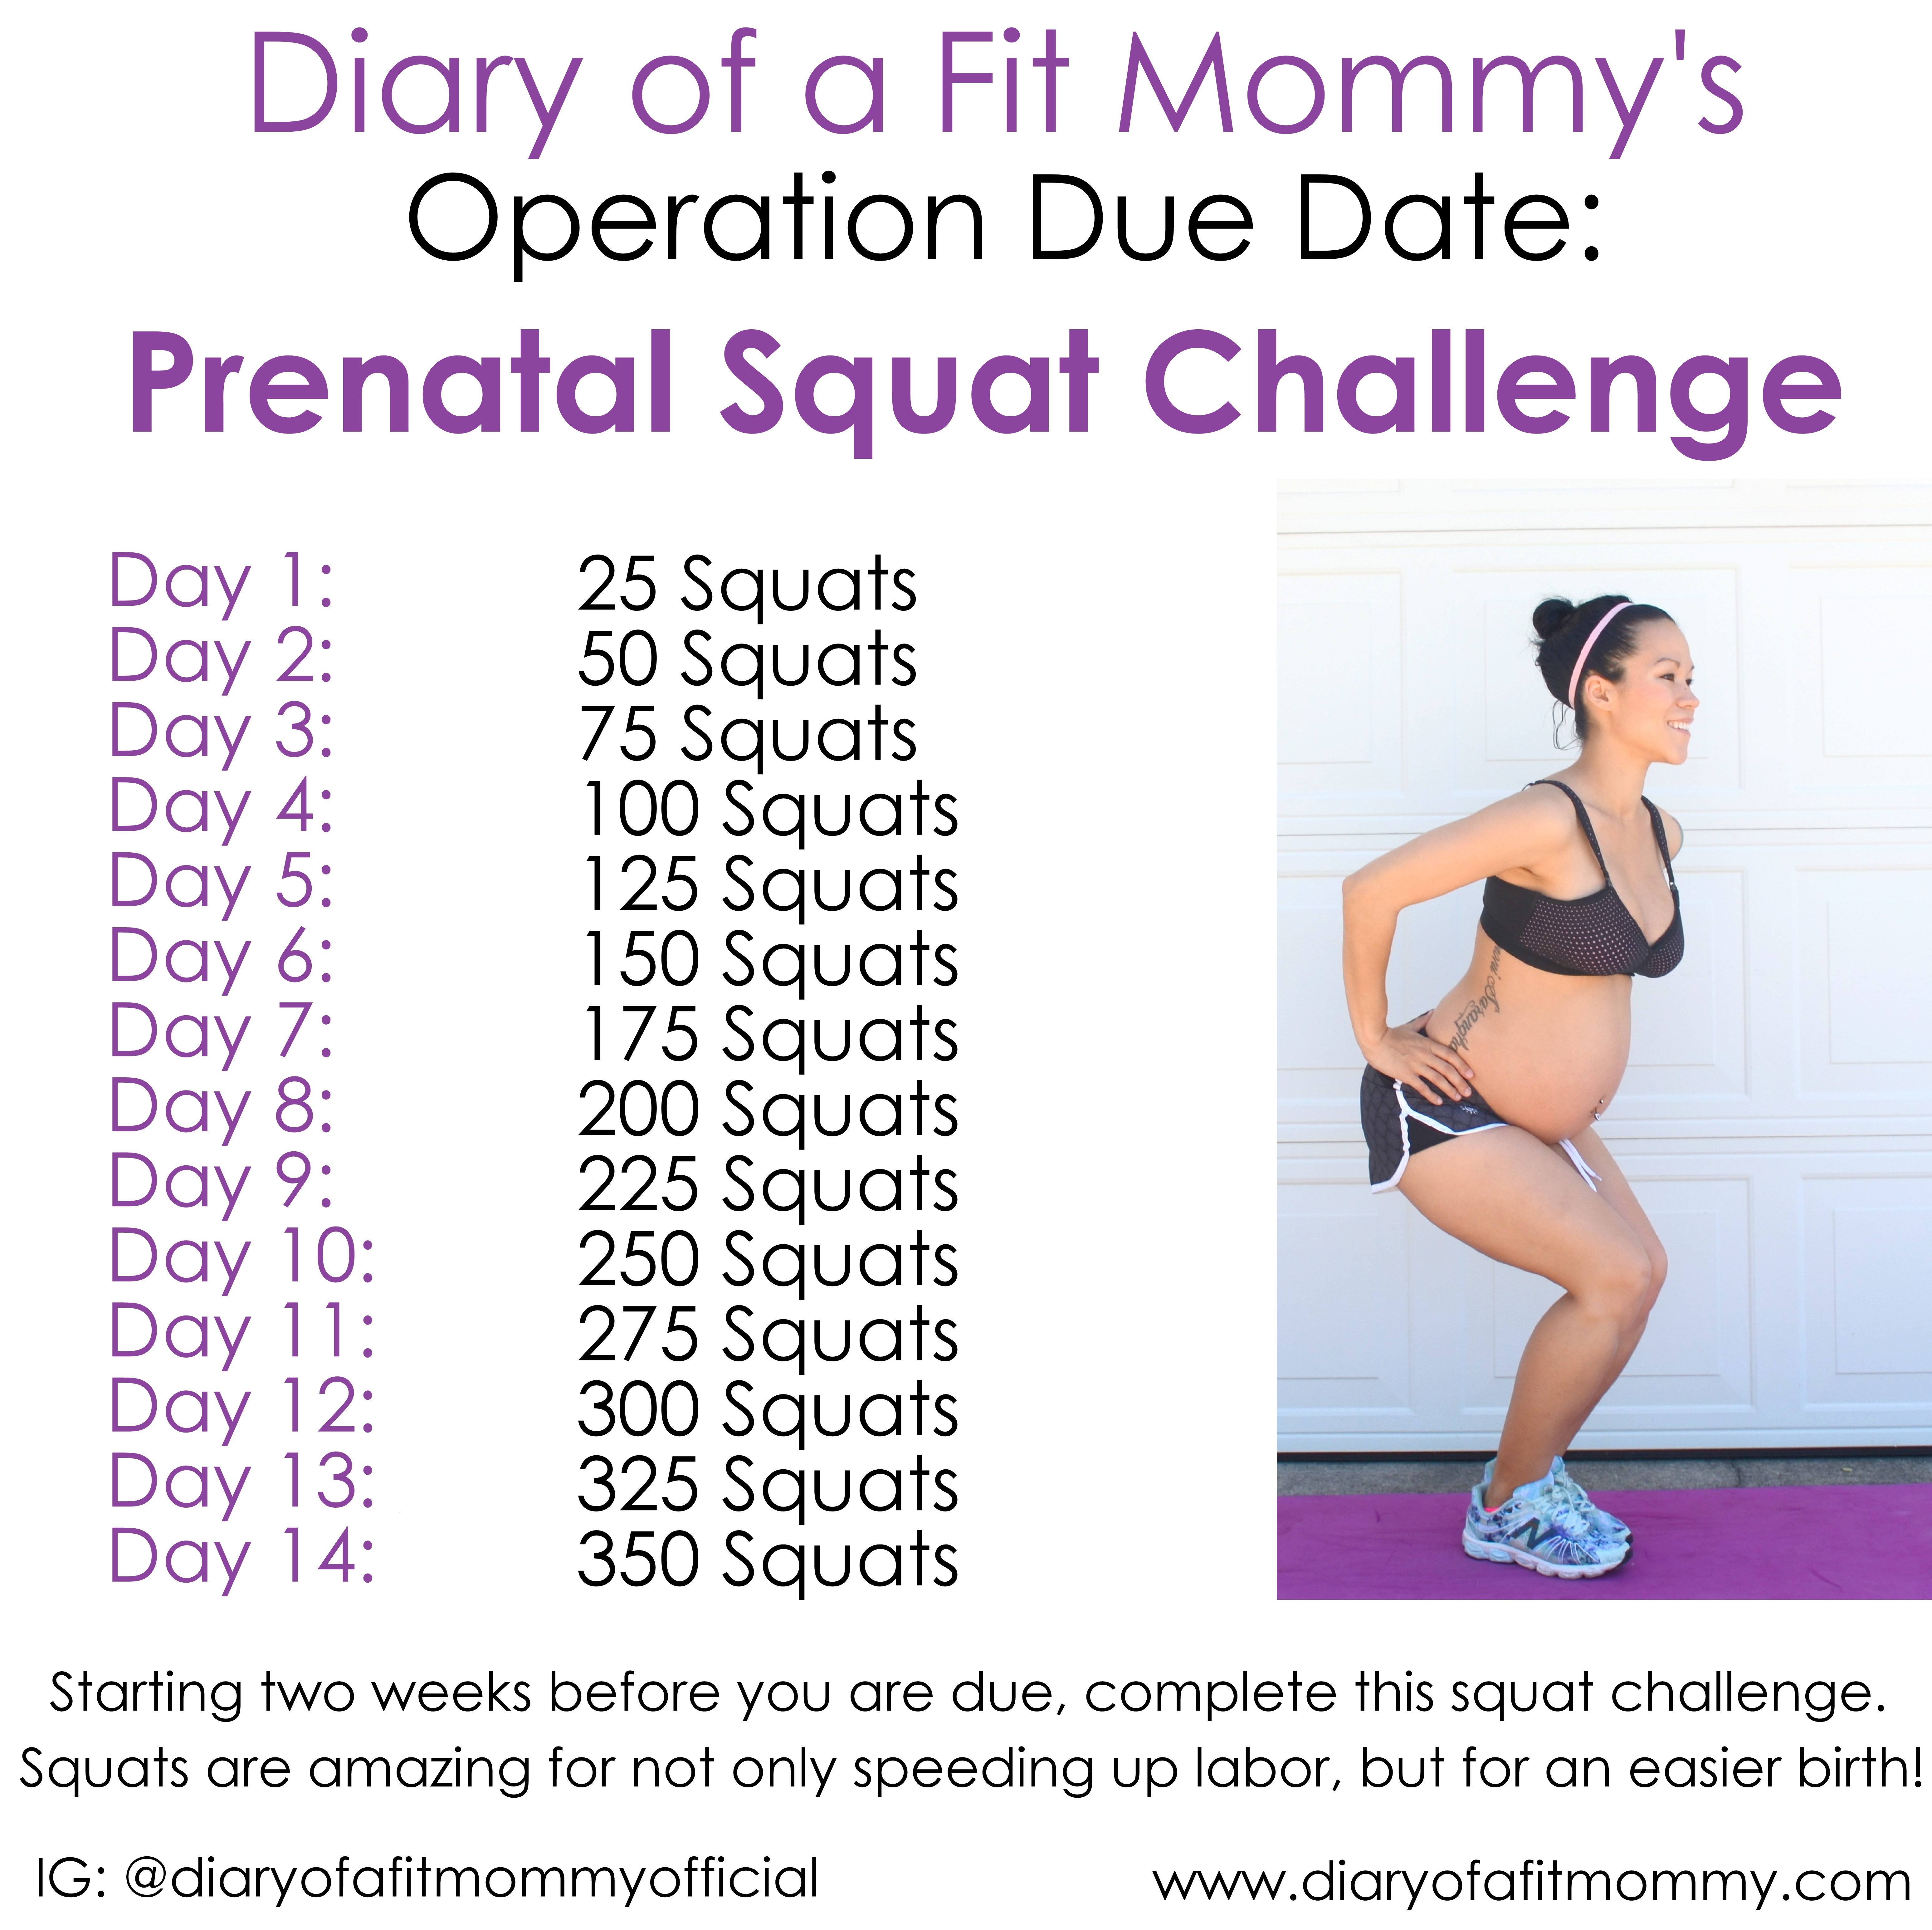 Squats During Pregnancy: How to Perform Safely